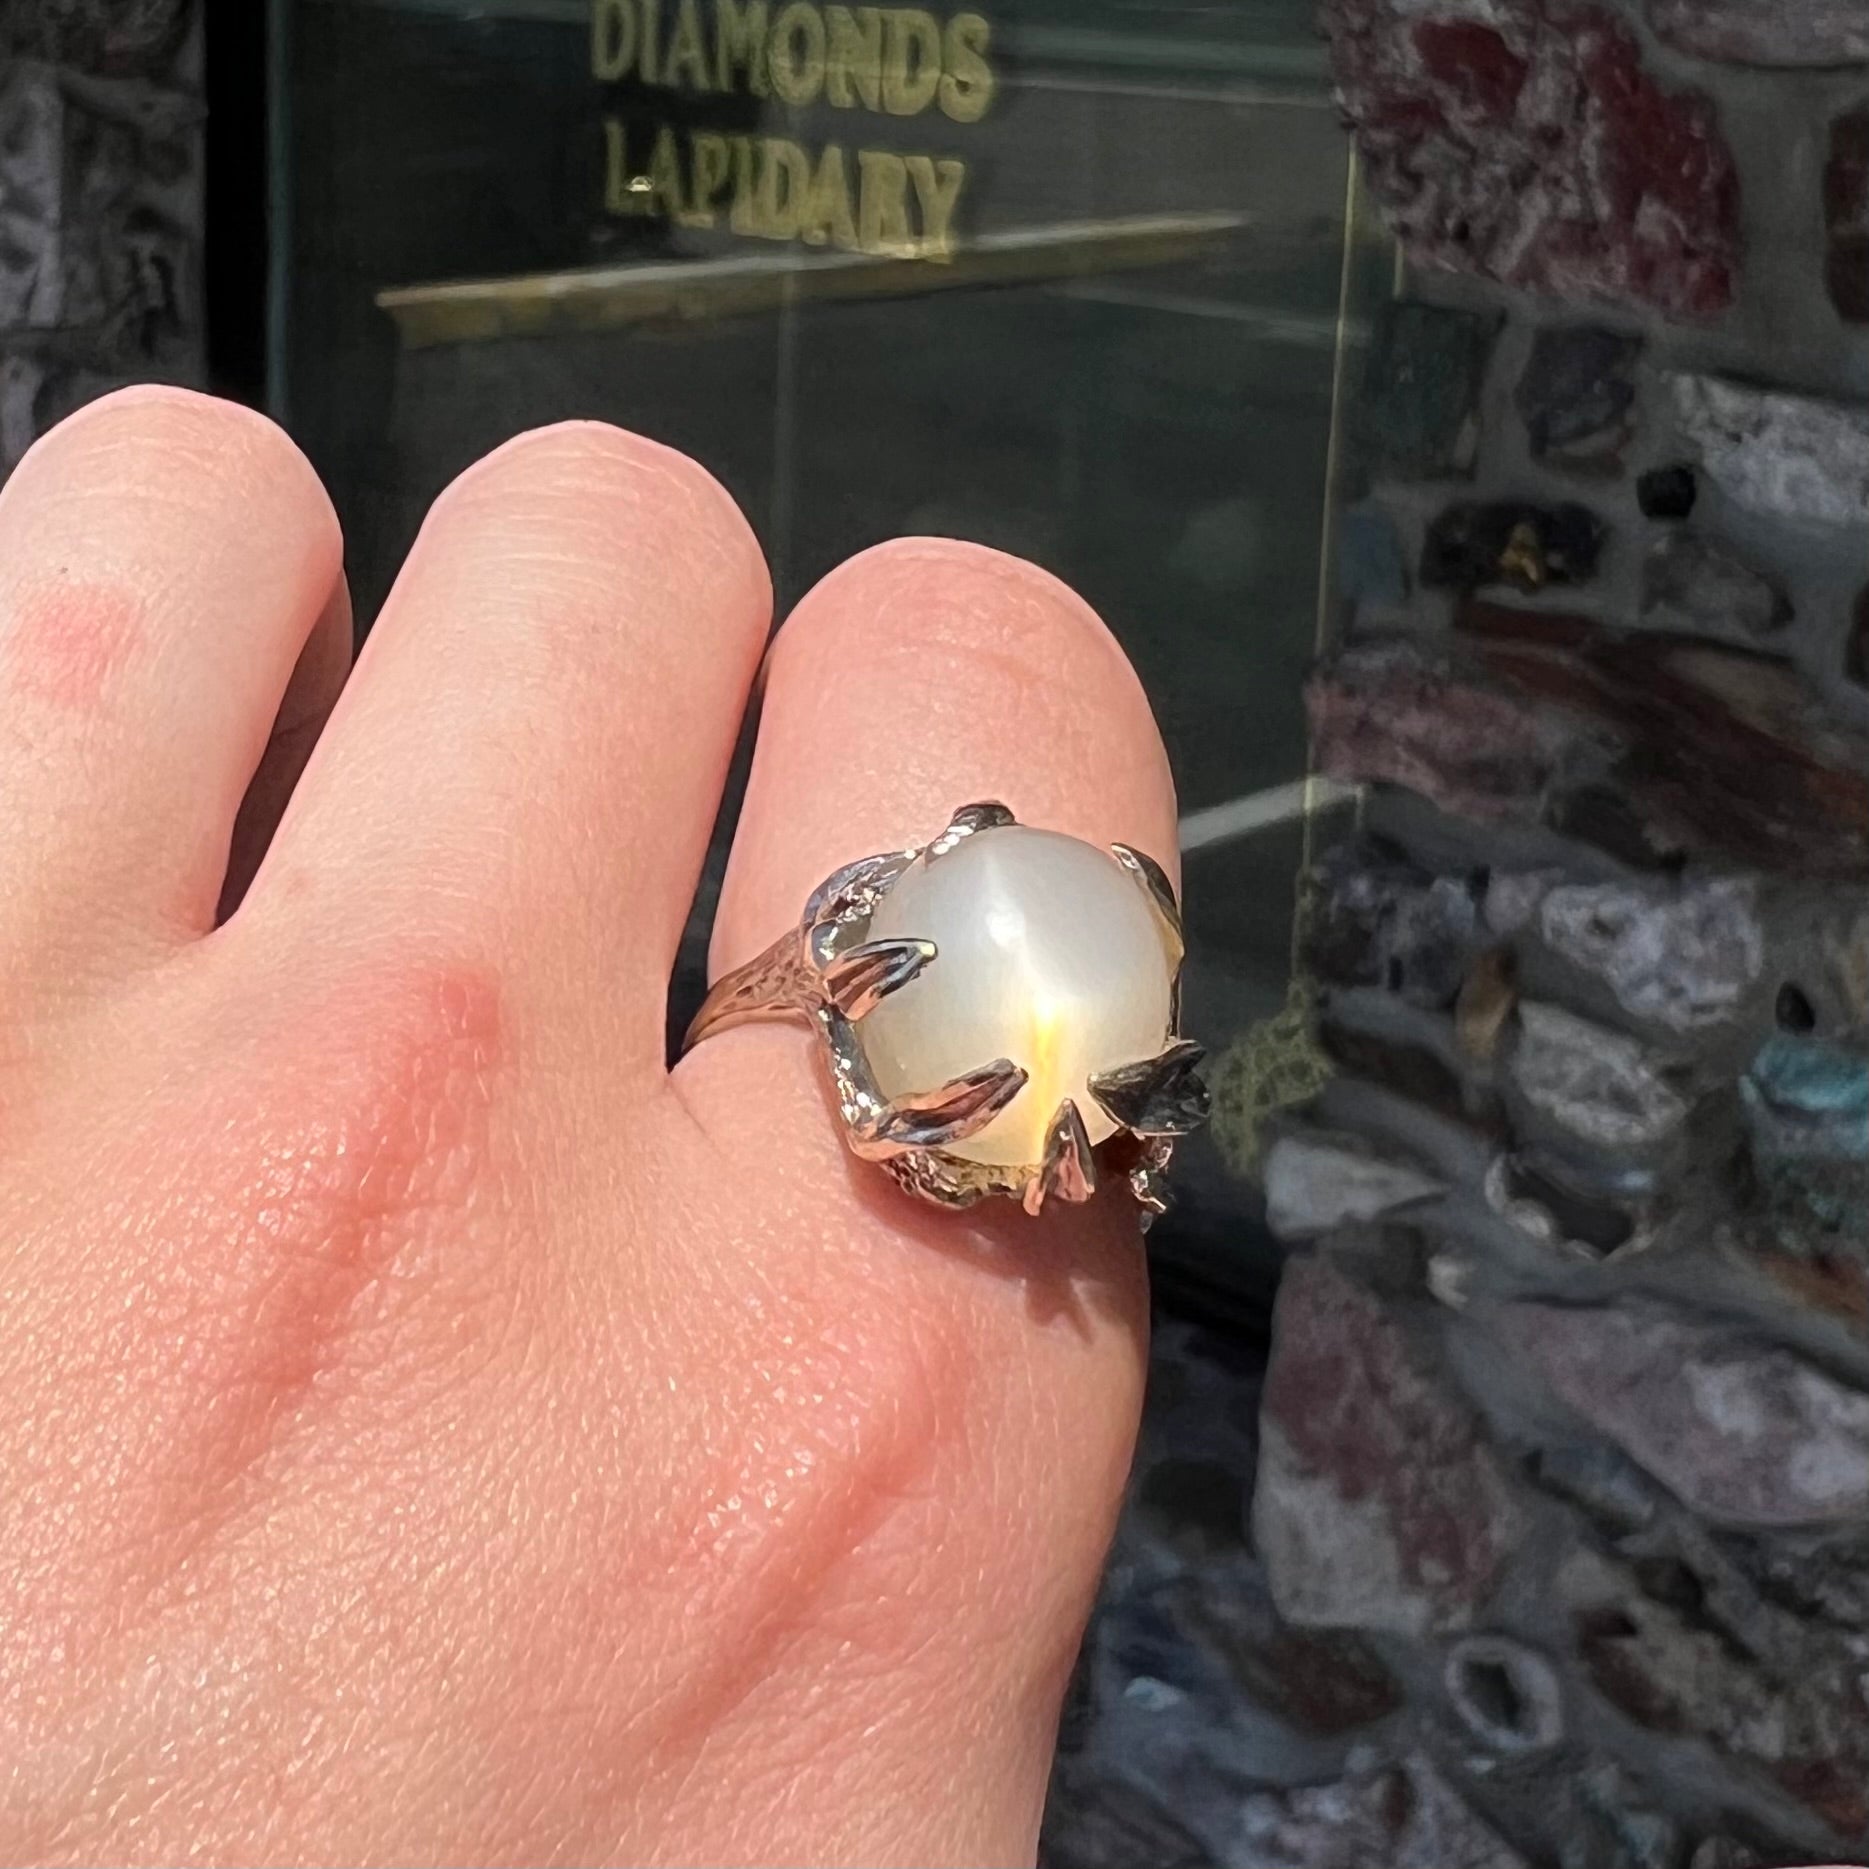 A ladies' organic style white gold moonstone ring.  The moonstone shows white adularescence on a creamy white body color.  Prongs resemble leaves holding the stone.